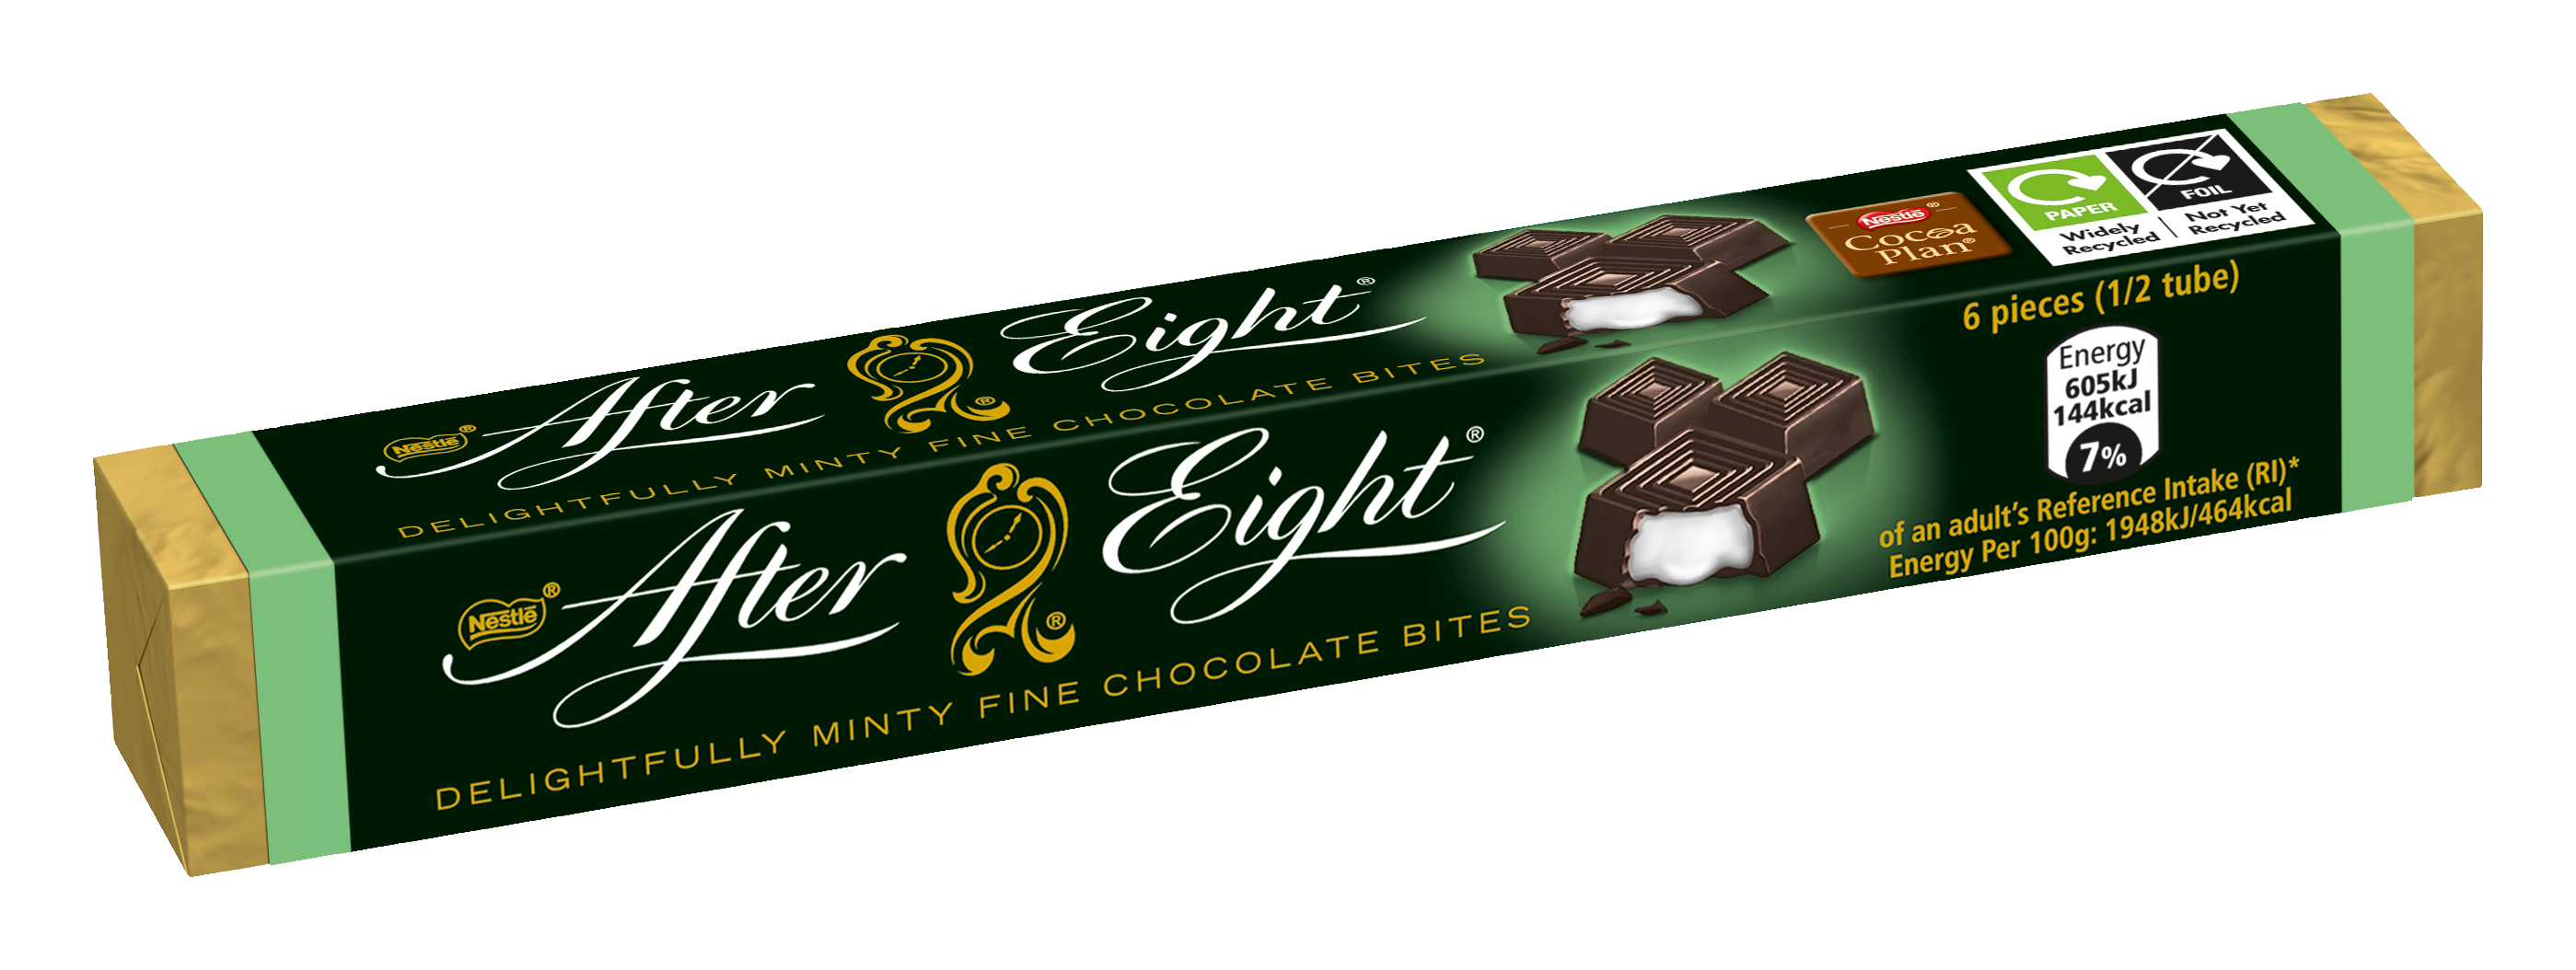 AFTER EIGHT® Bite Size